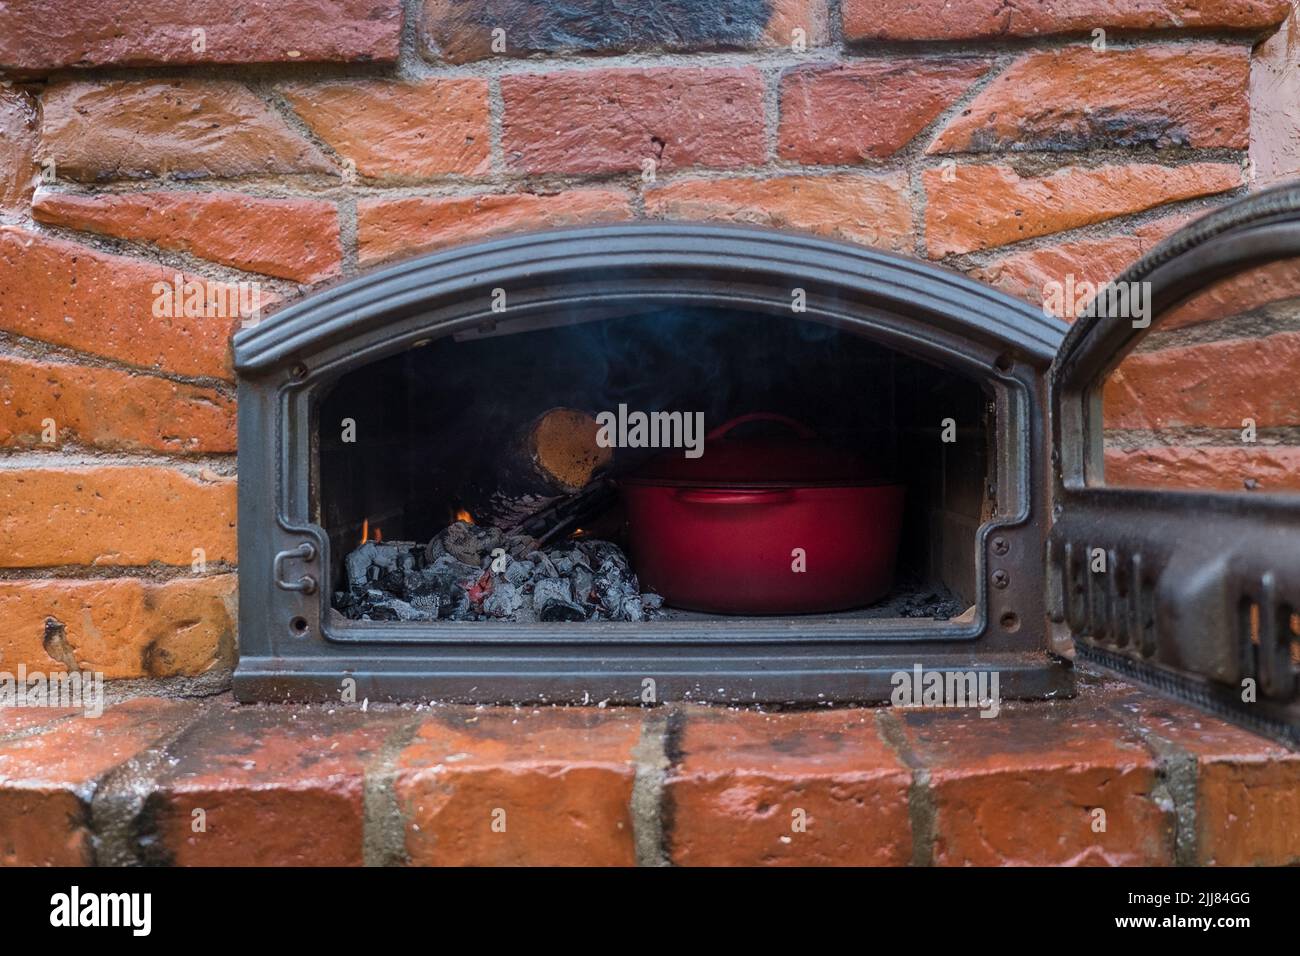 Cooking in stone oven. Cast iron pot in wood-fired oven. Stock Photo